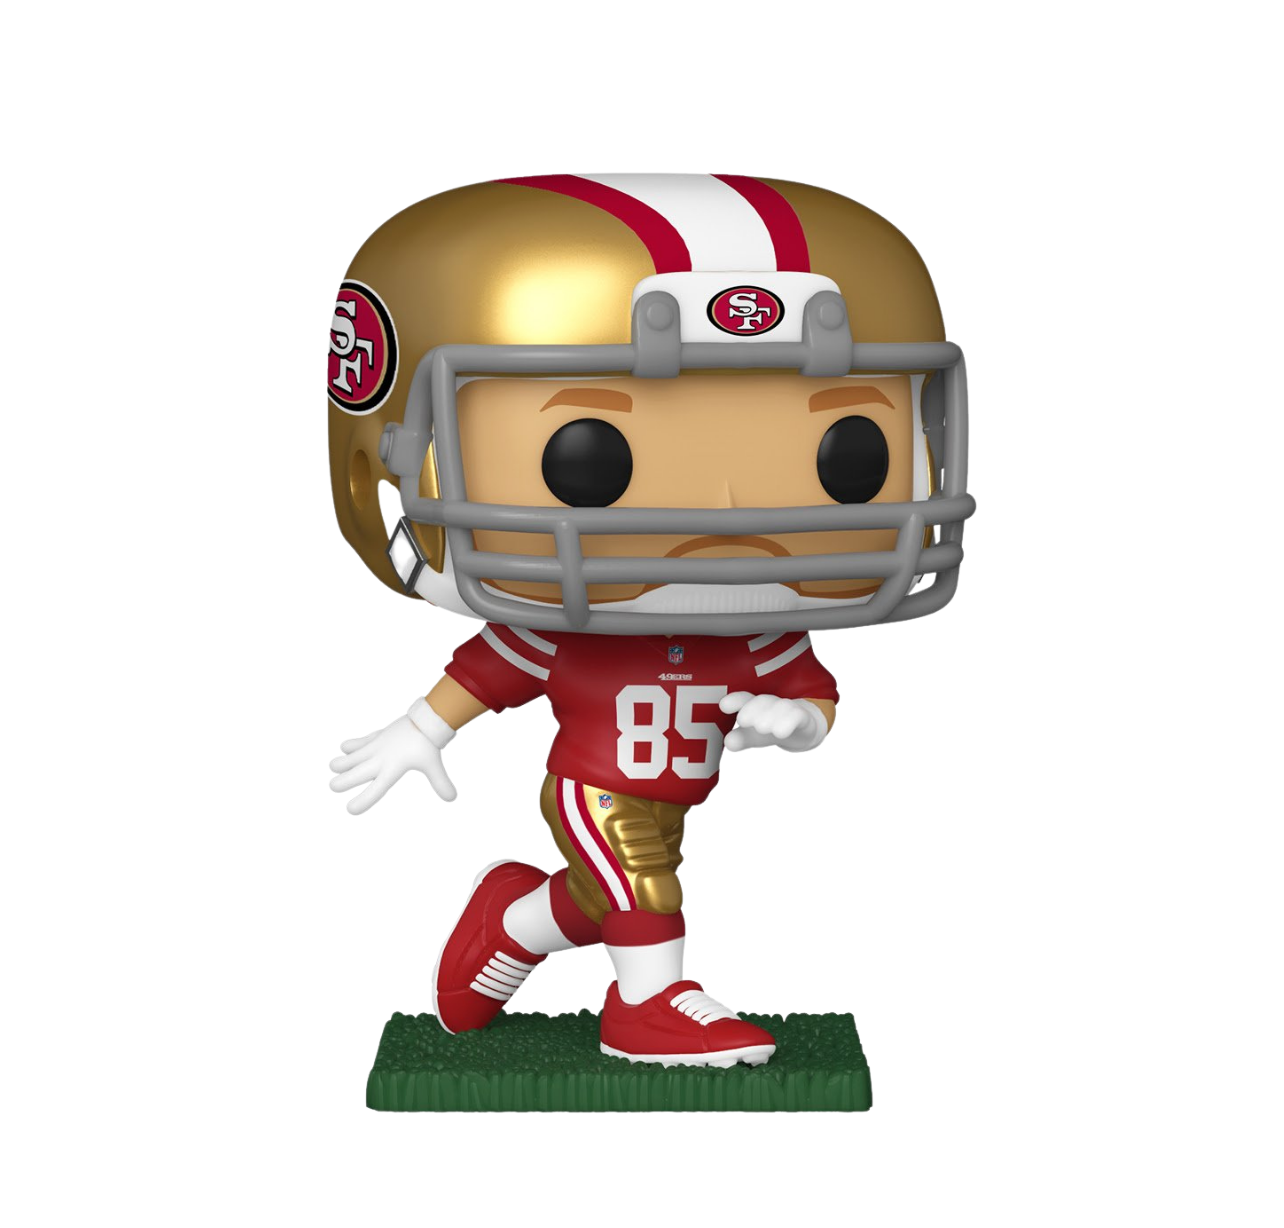 Nfl 49ers Funko Pop George Kittle With Helmet Pre Order Big Apple Collectibles